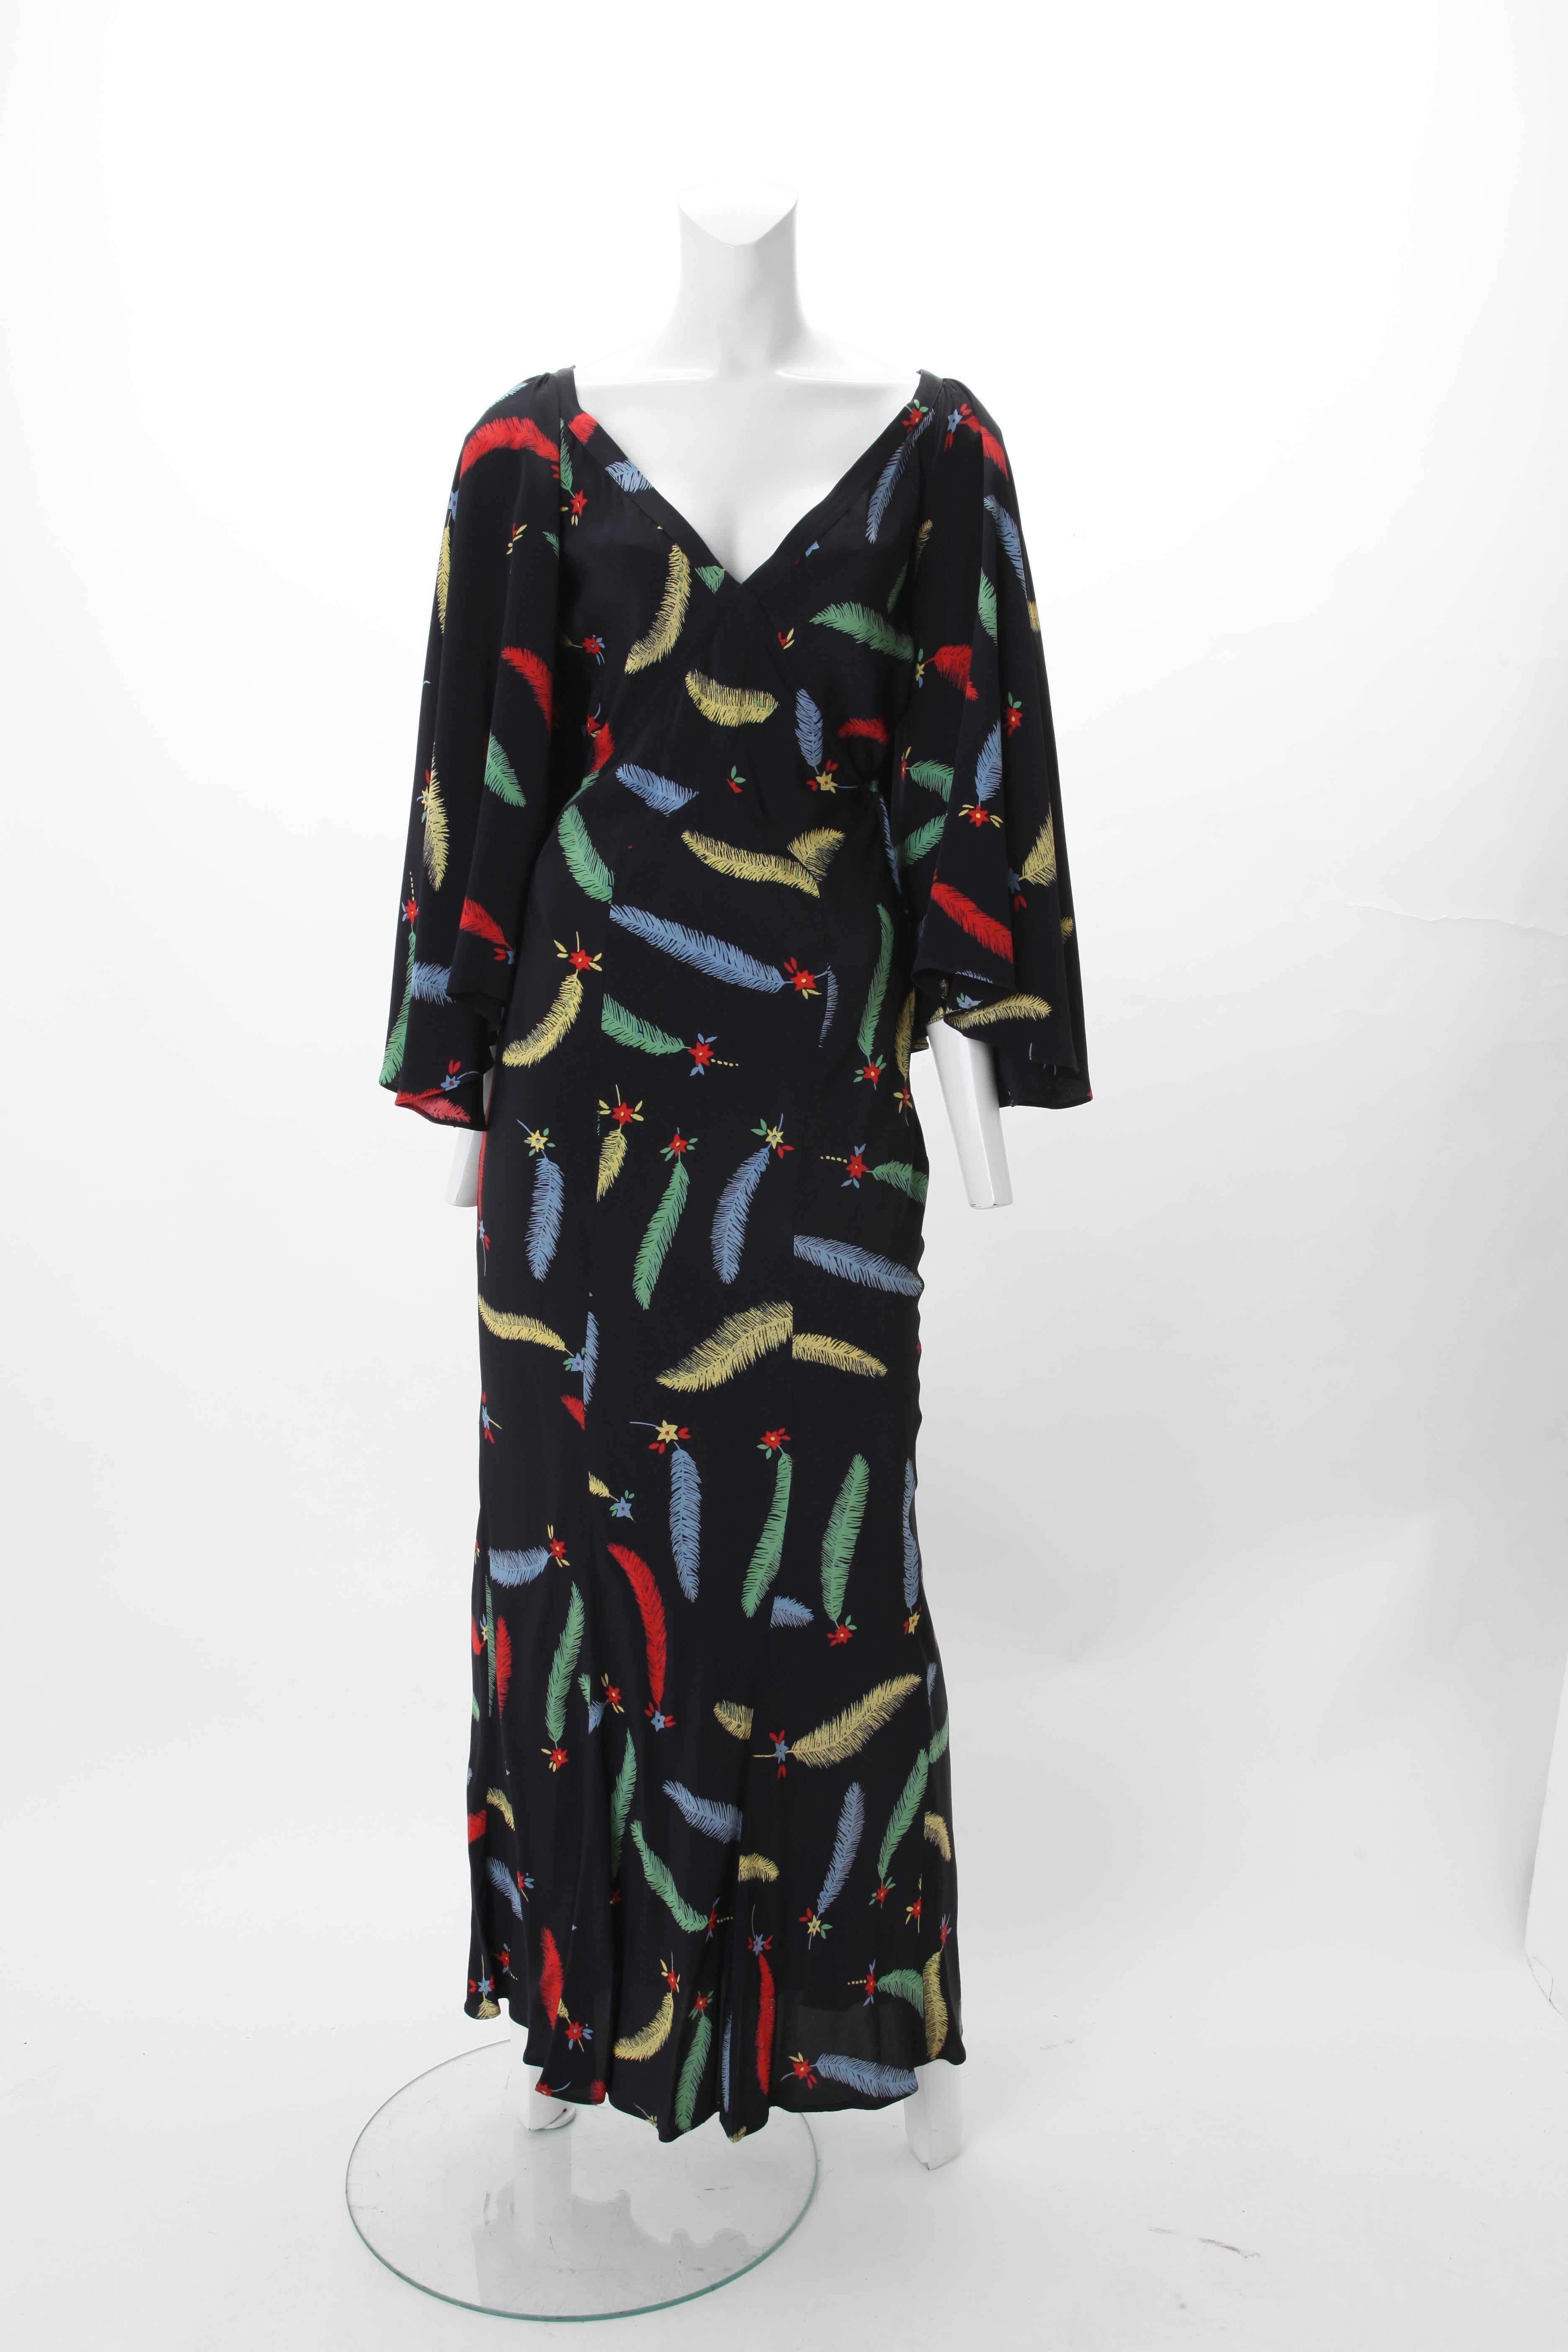 1970s Ossie Clark Celia Birtwell Print Maxi Gown; V-neck empire bodice with flared sleeves; Open back with criss-cross panels w/ metal hoop fastening; side zipper closure. Polychrome leaf and flowerhead print on black ground.